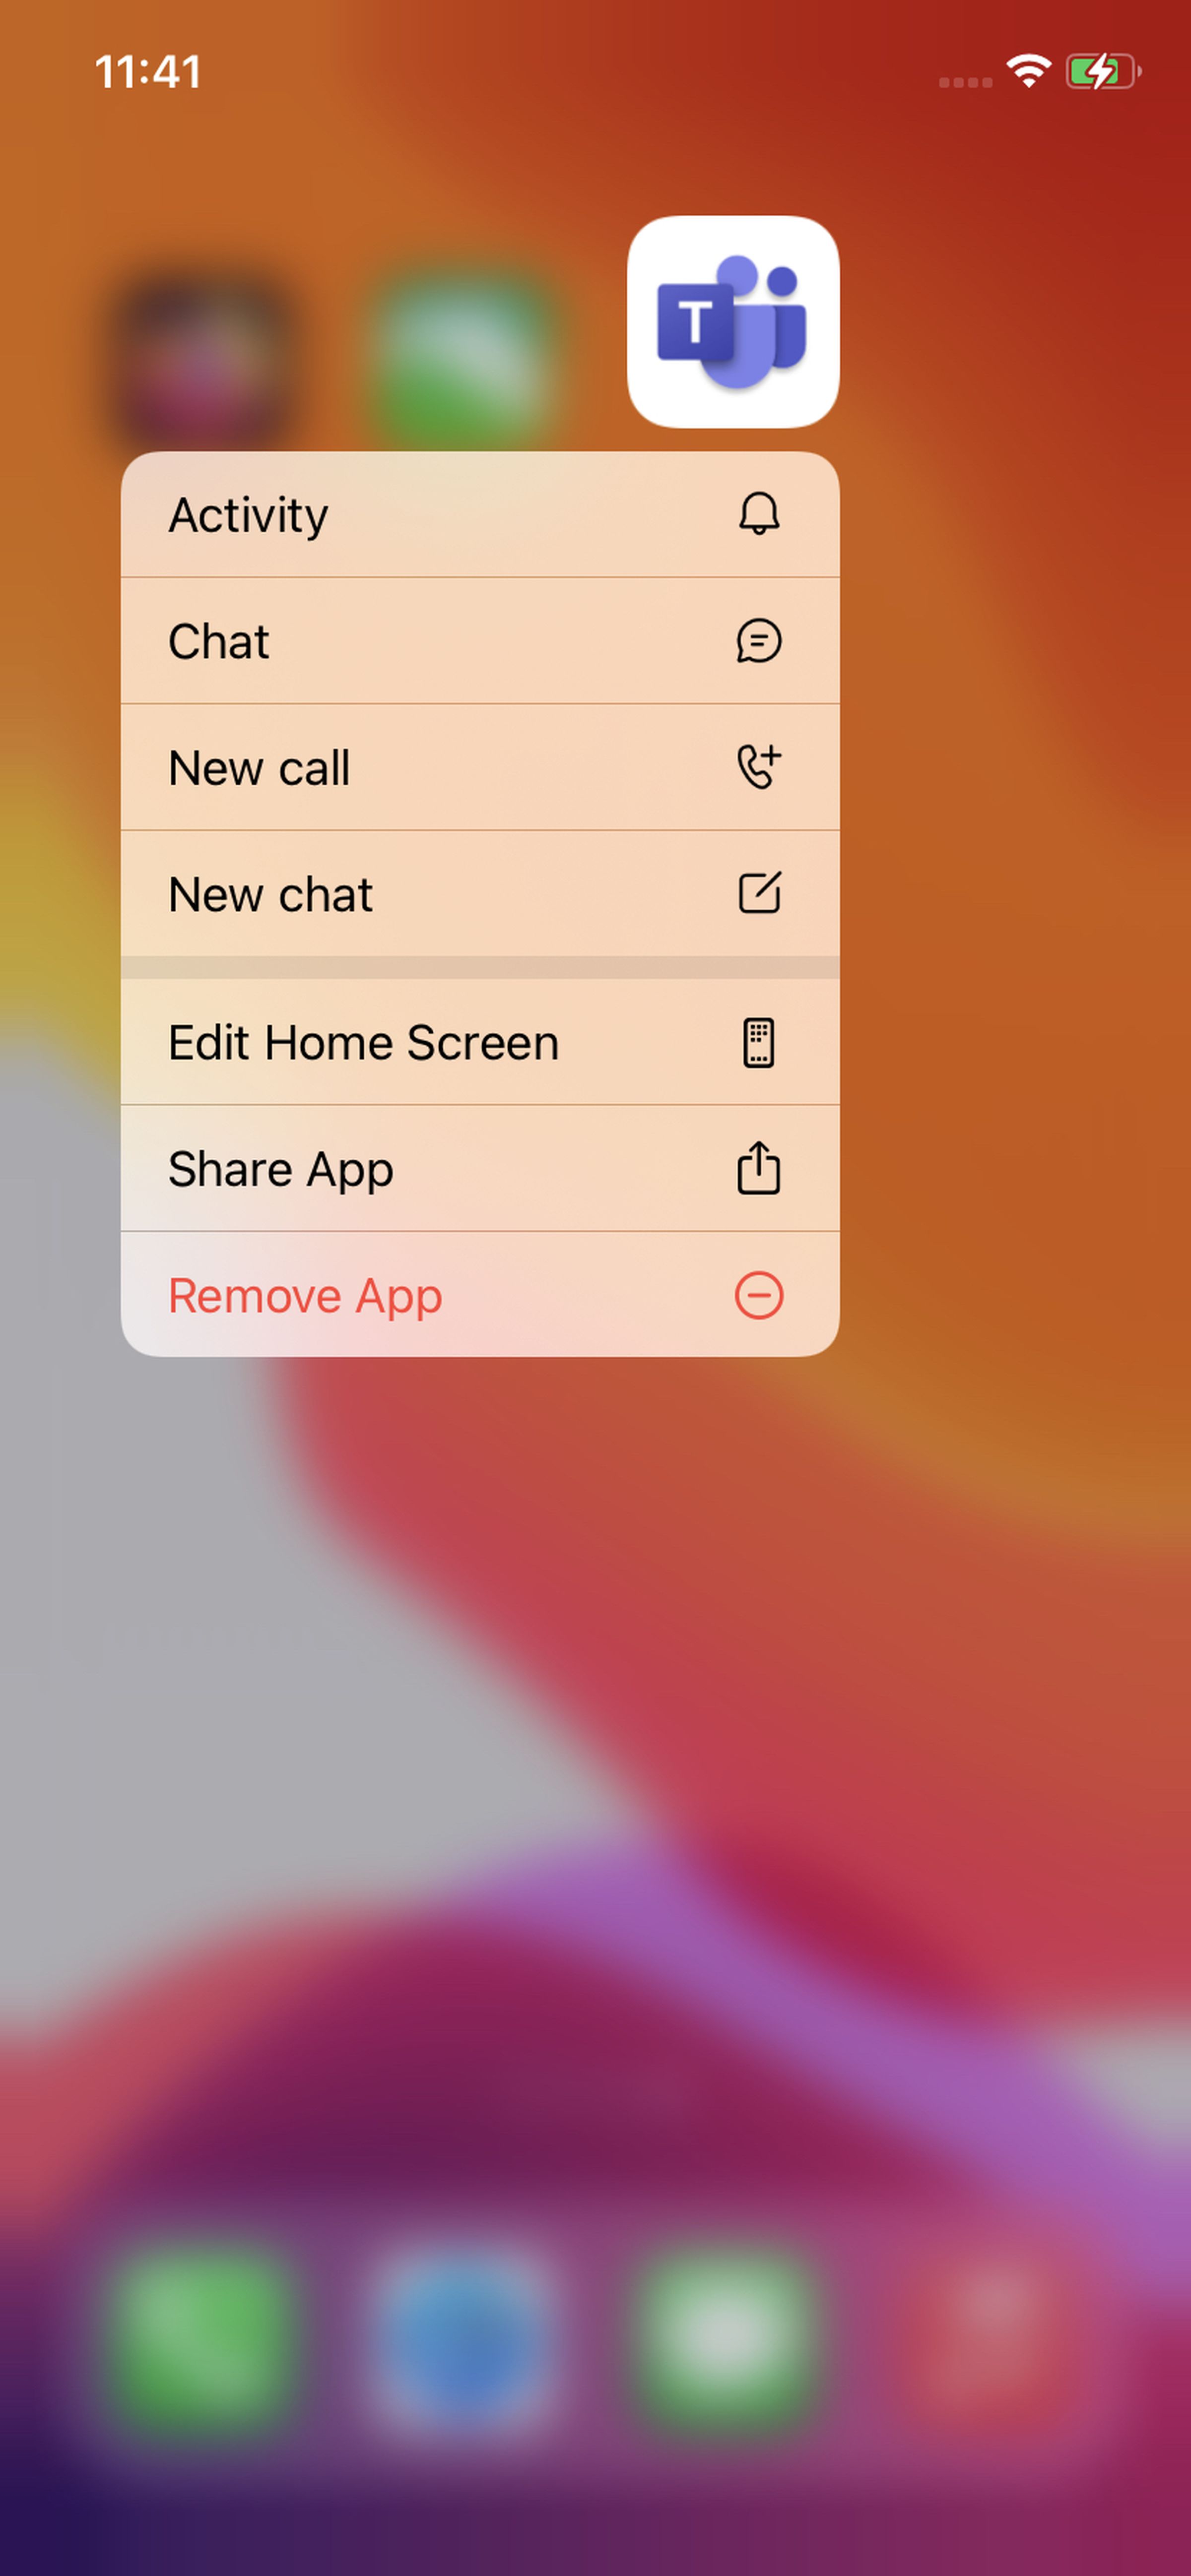 Long-press on an app and select “Remove App”